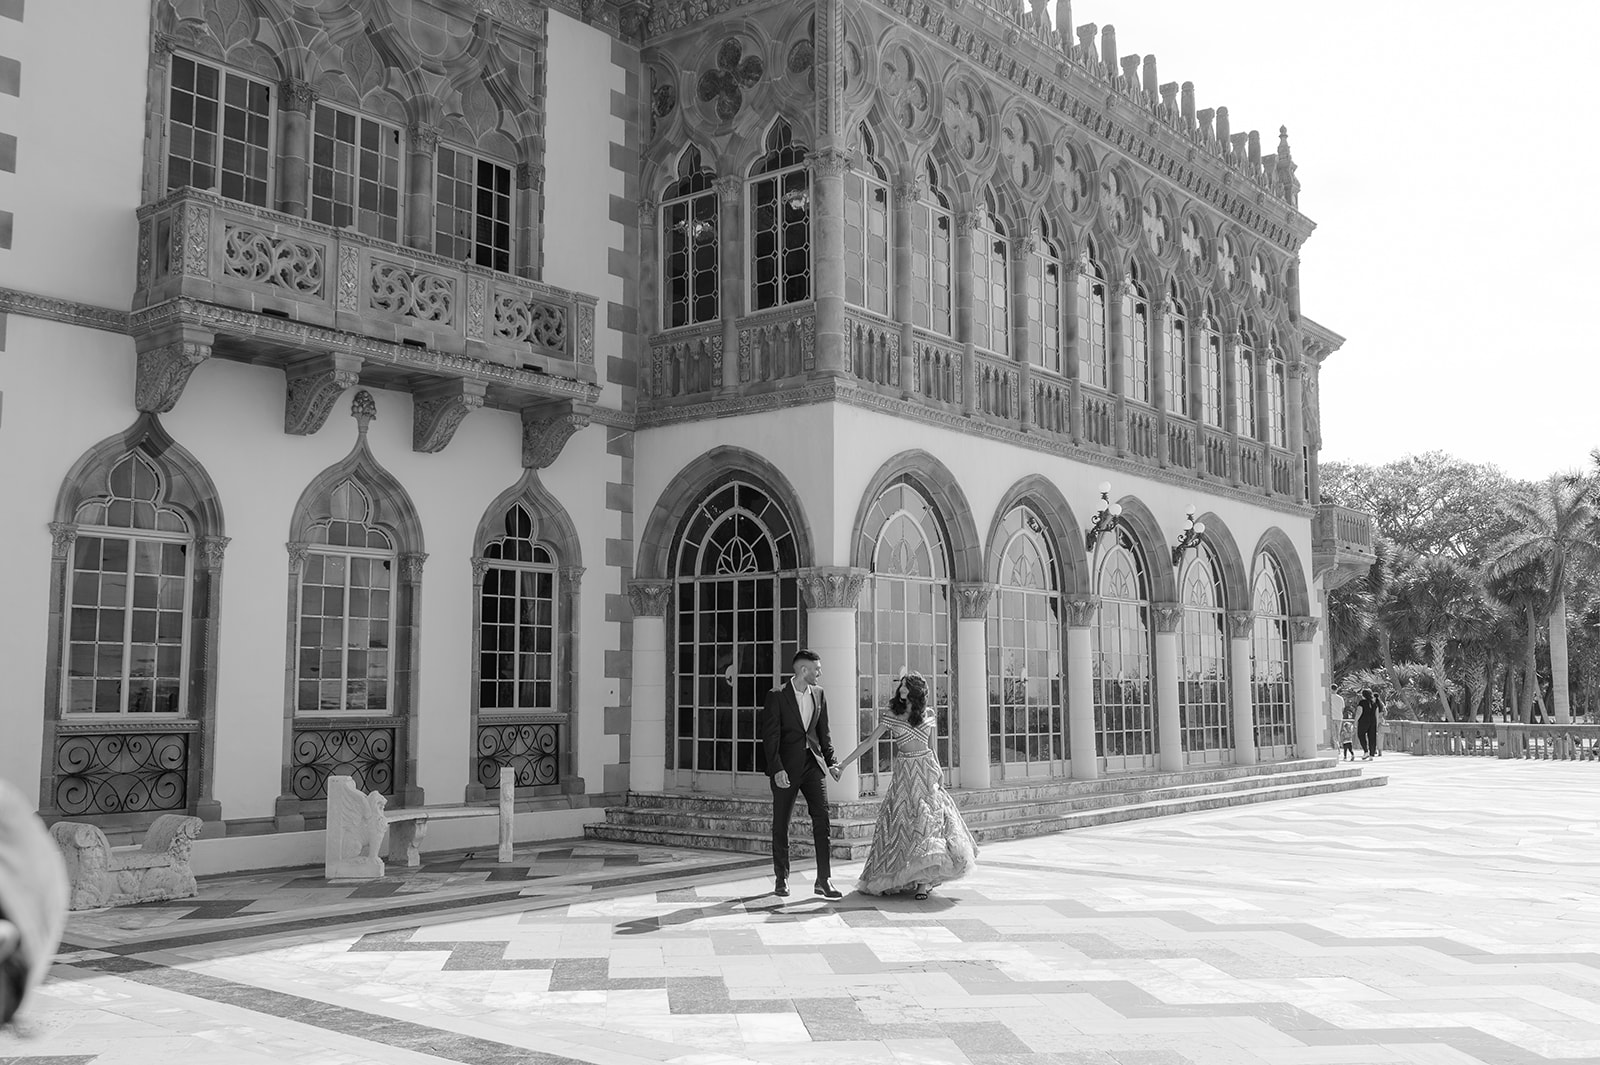 "Stunning engagement session at the John and Mable Ringling Museum with Indian couple in traditional attire"
